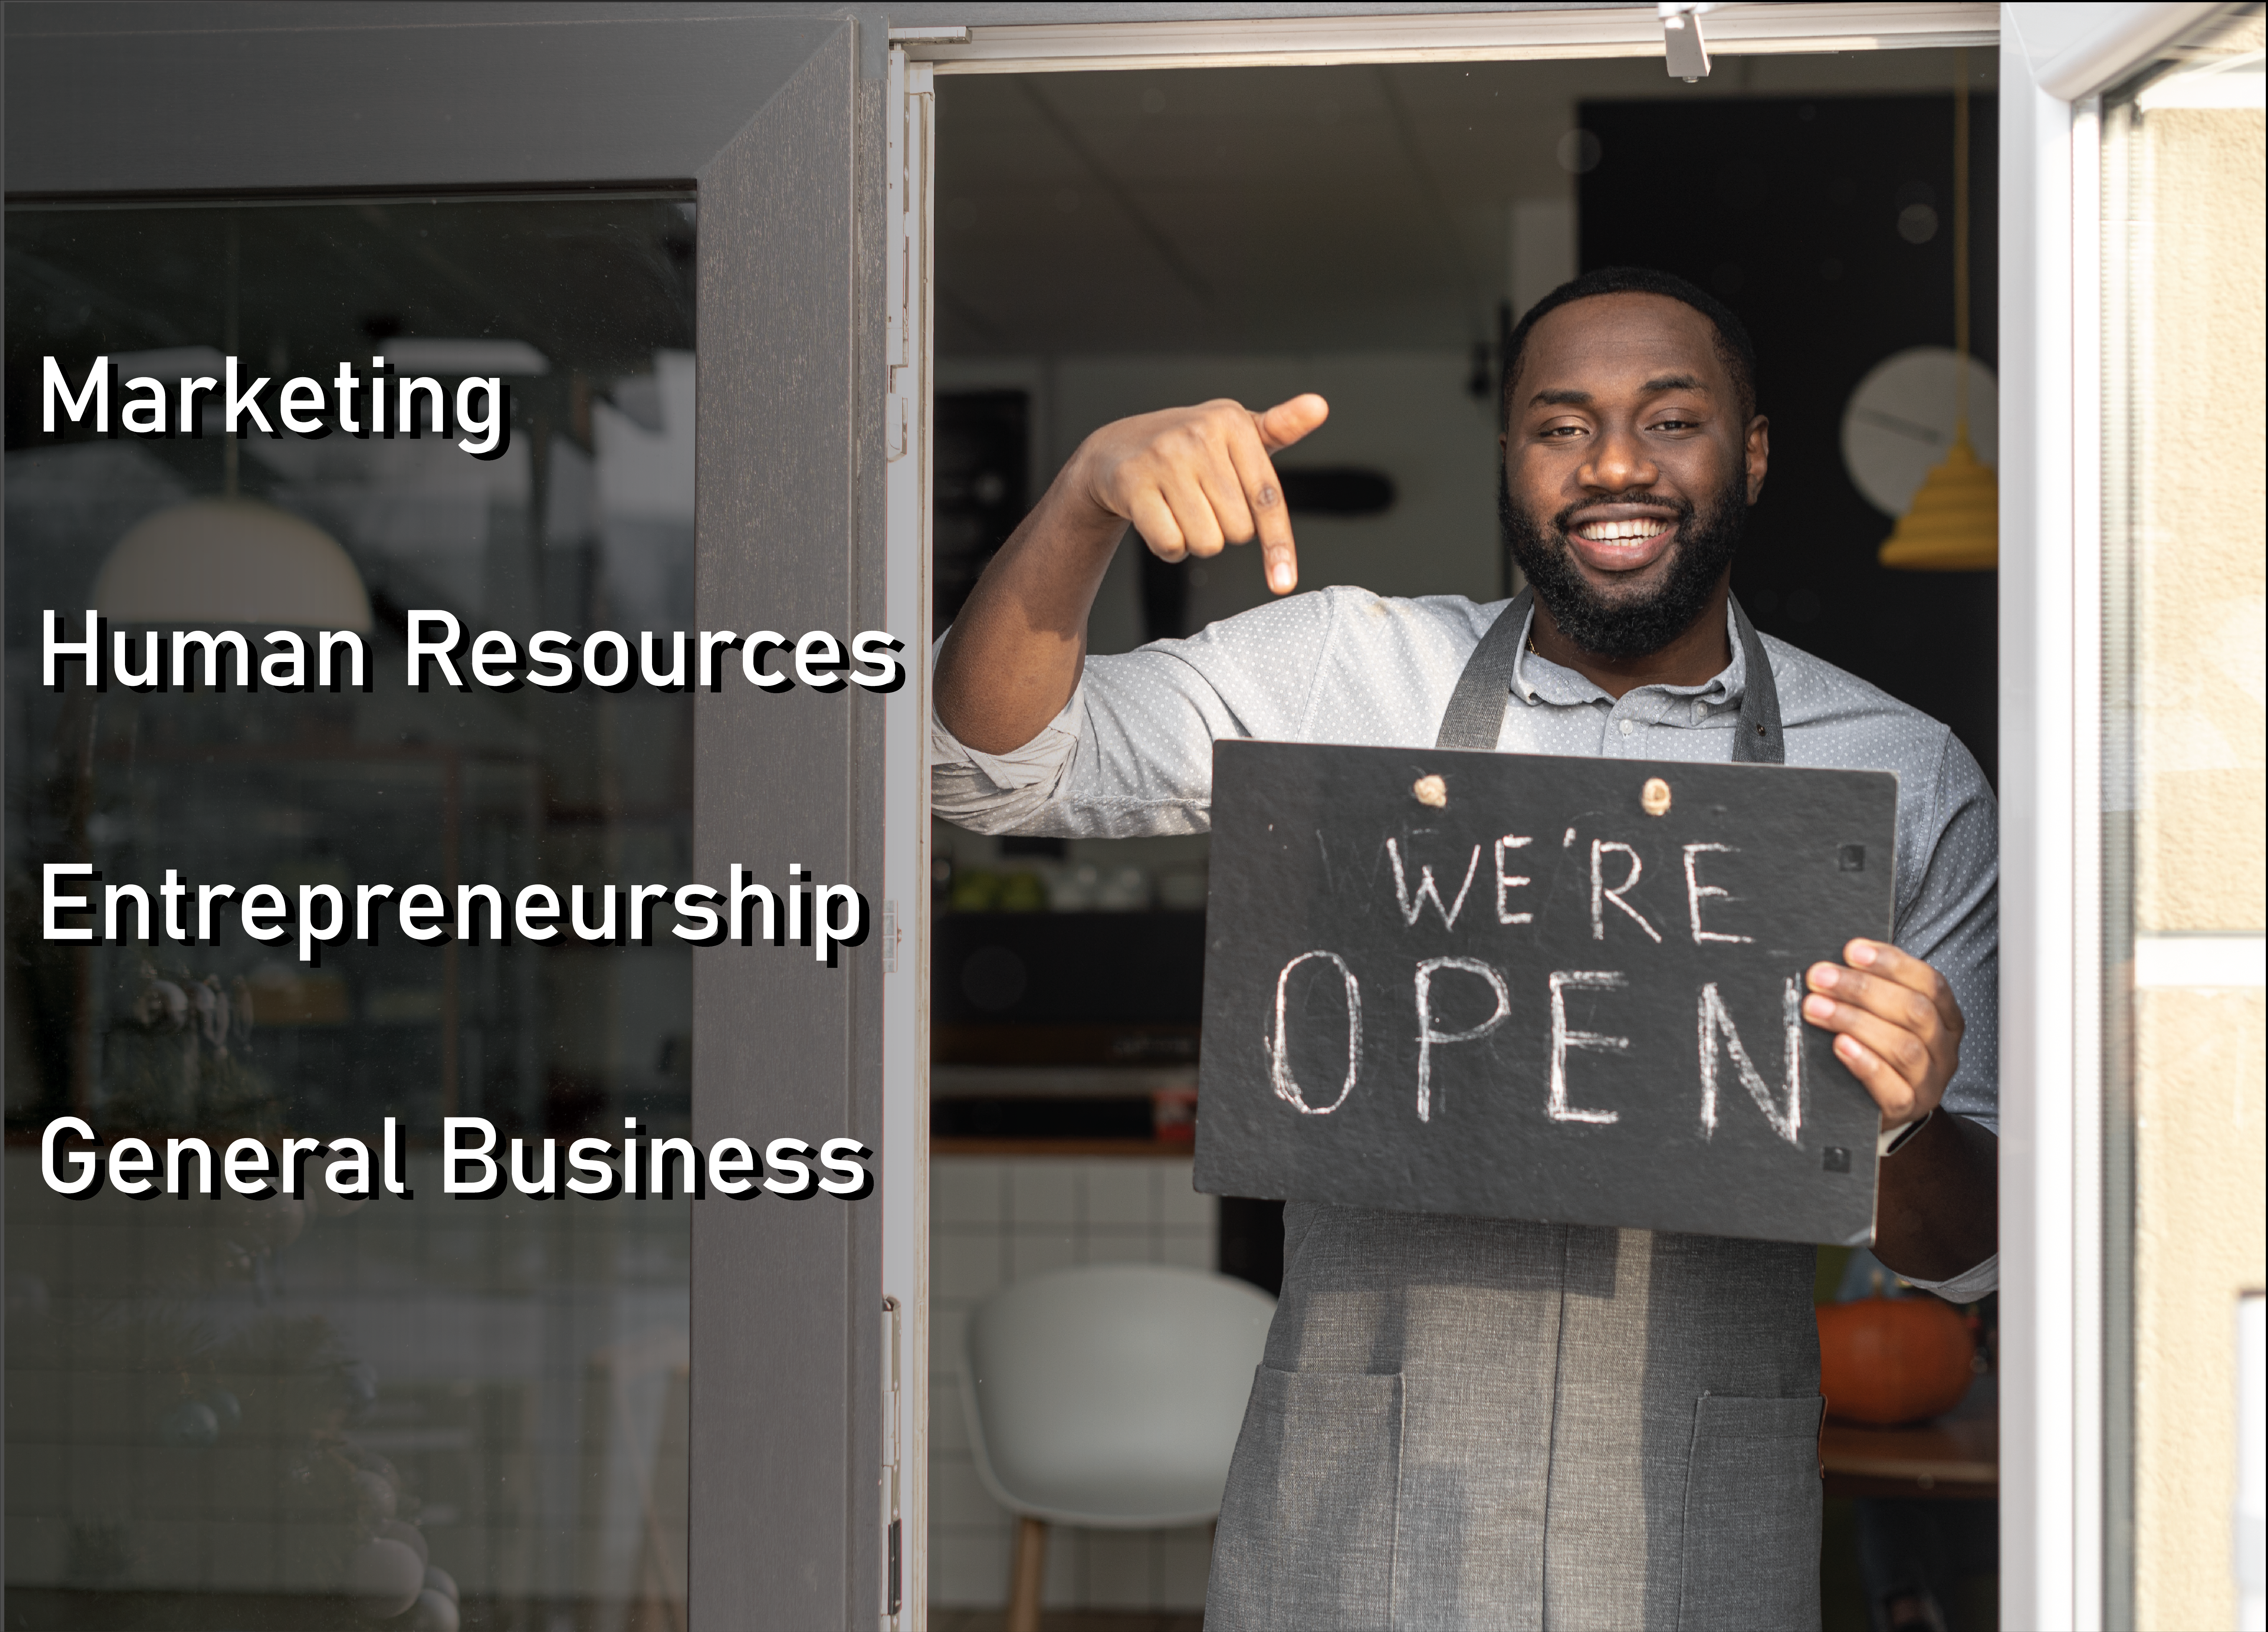 Business owner with a "We're Open" sign. Words added to image are Marketing, Human Resources, Entrepreneurship and General Business